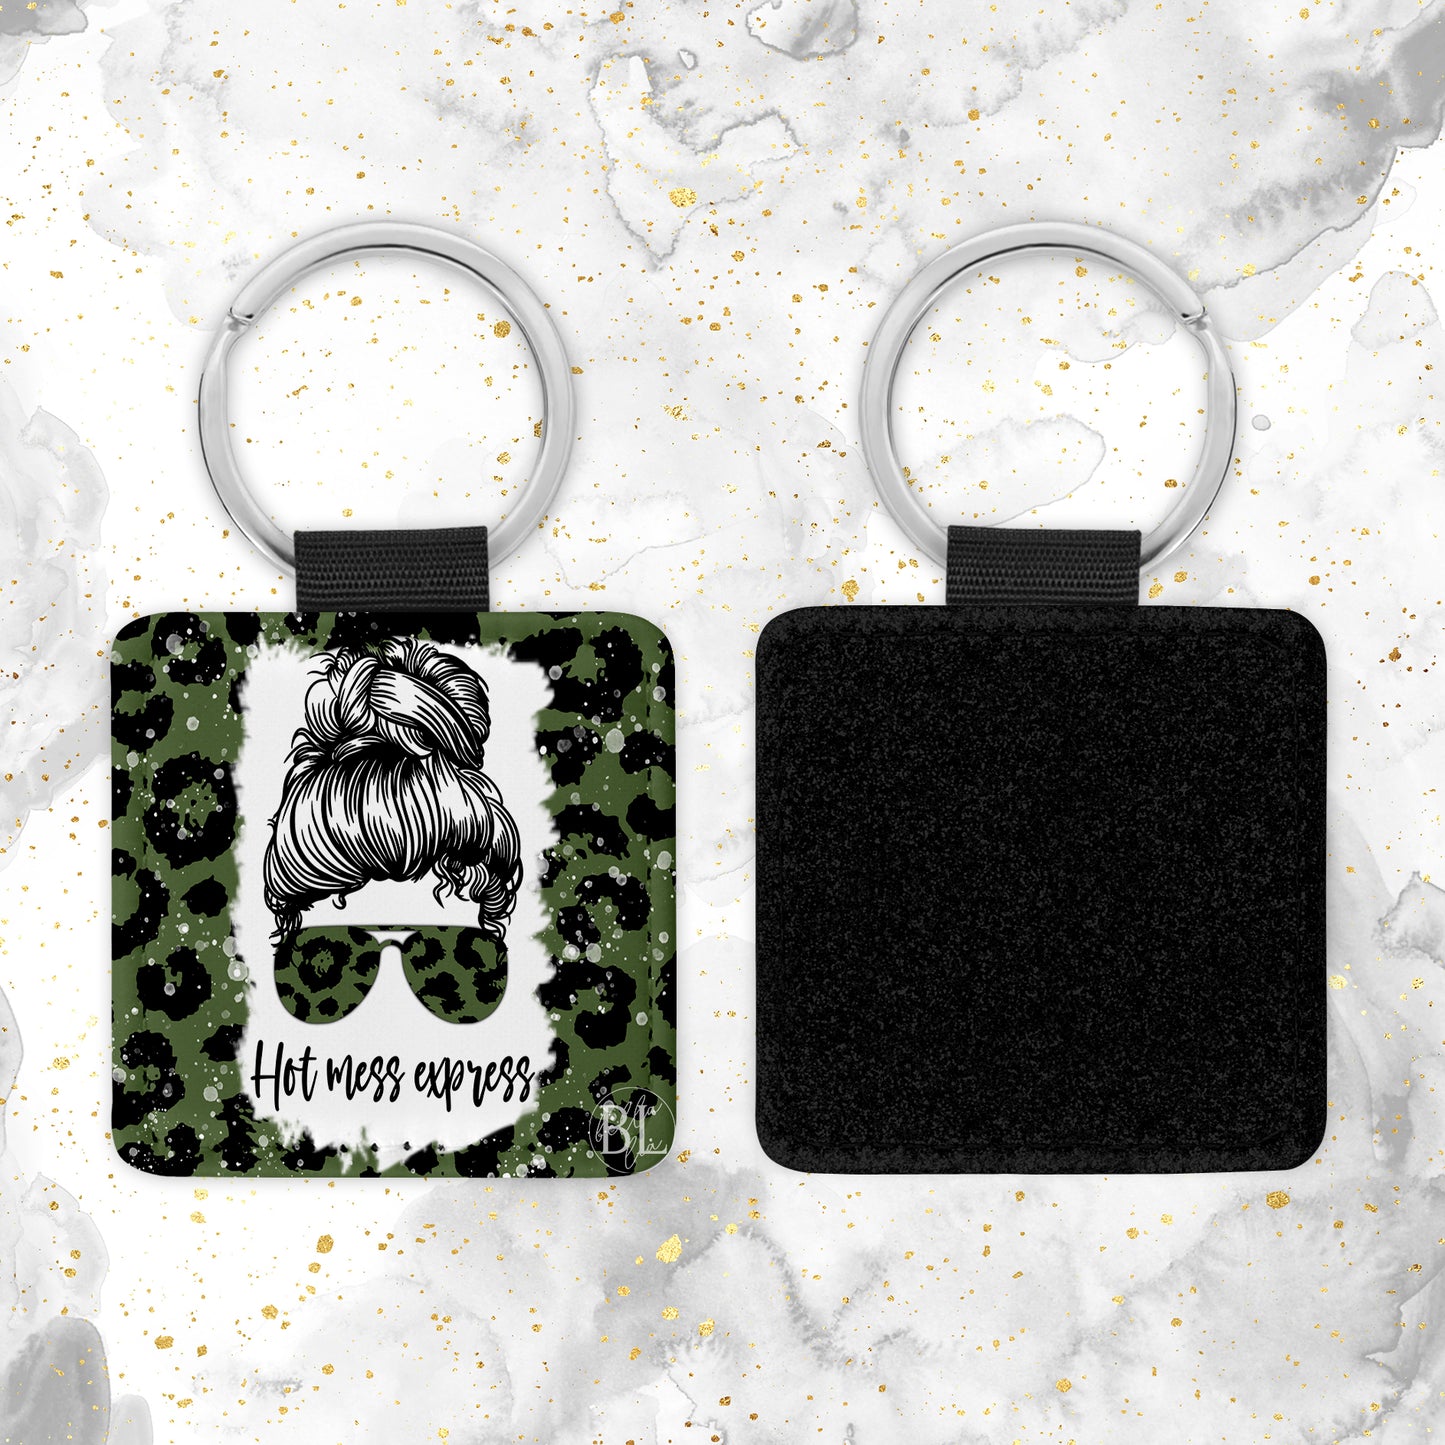 Hot Mess Express Leather Keychain - Bella Lia Boutique